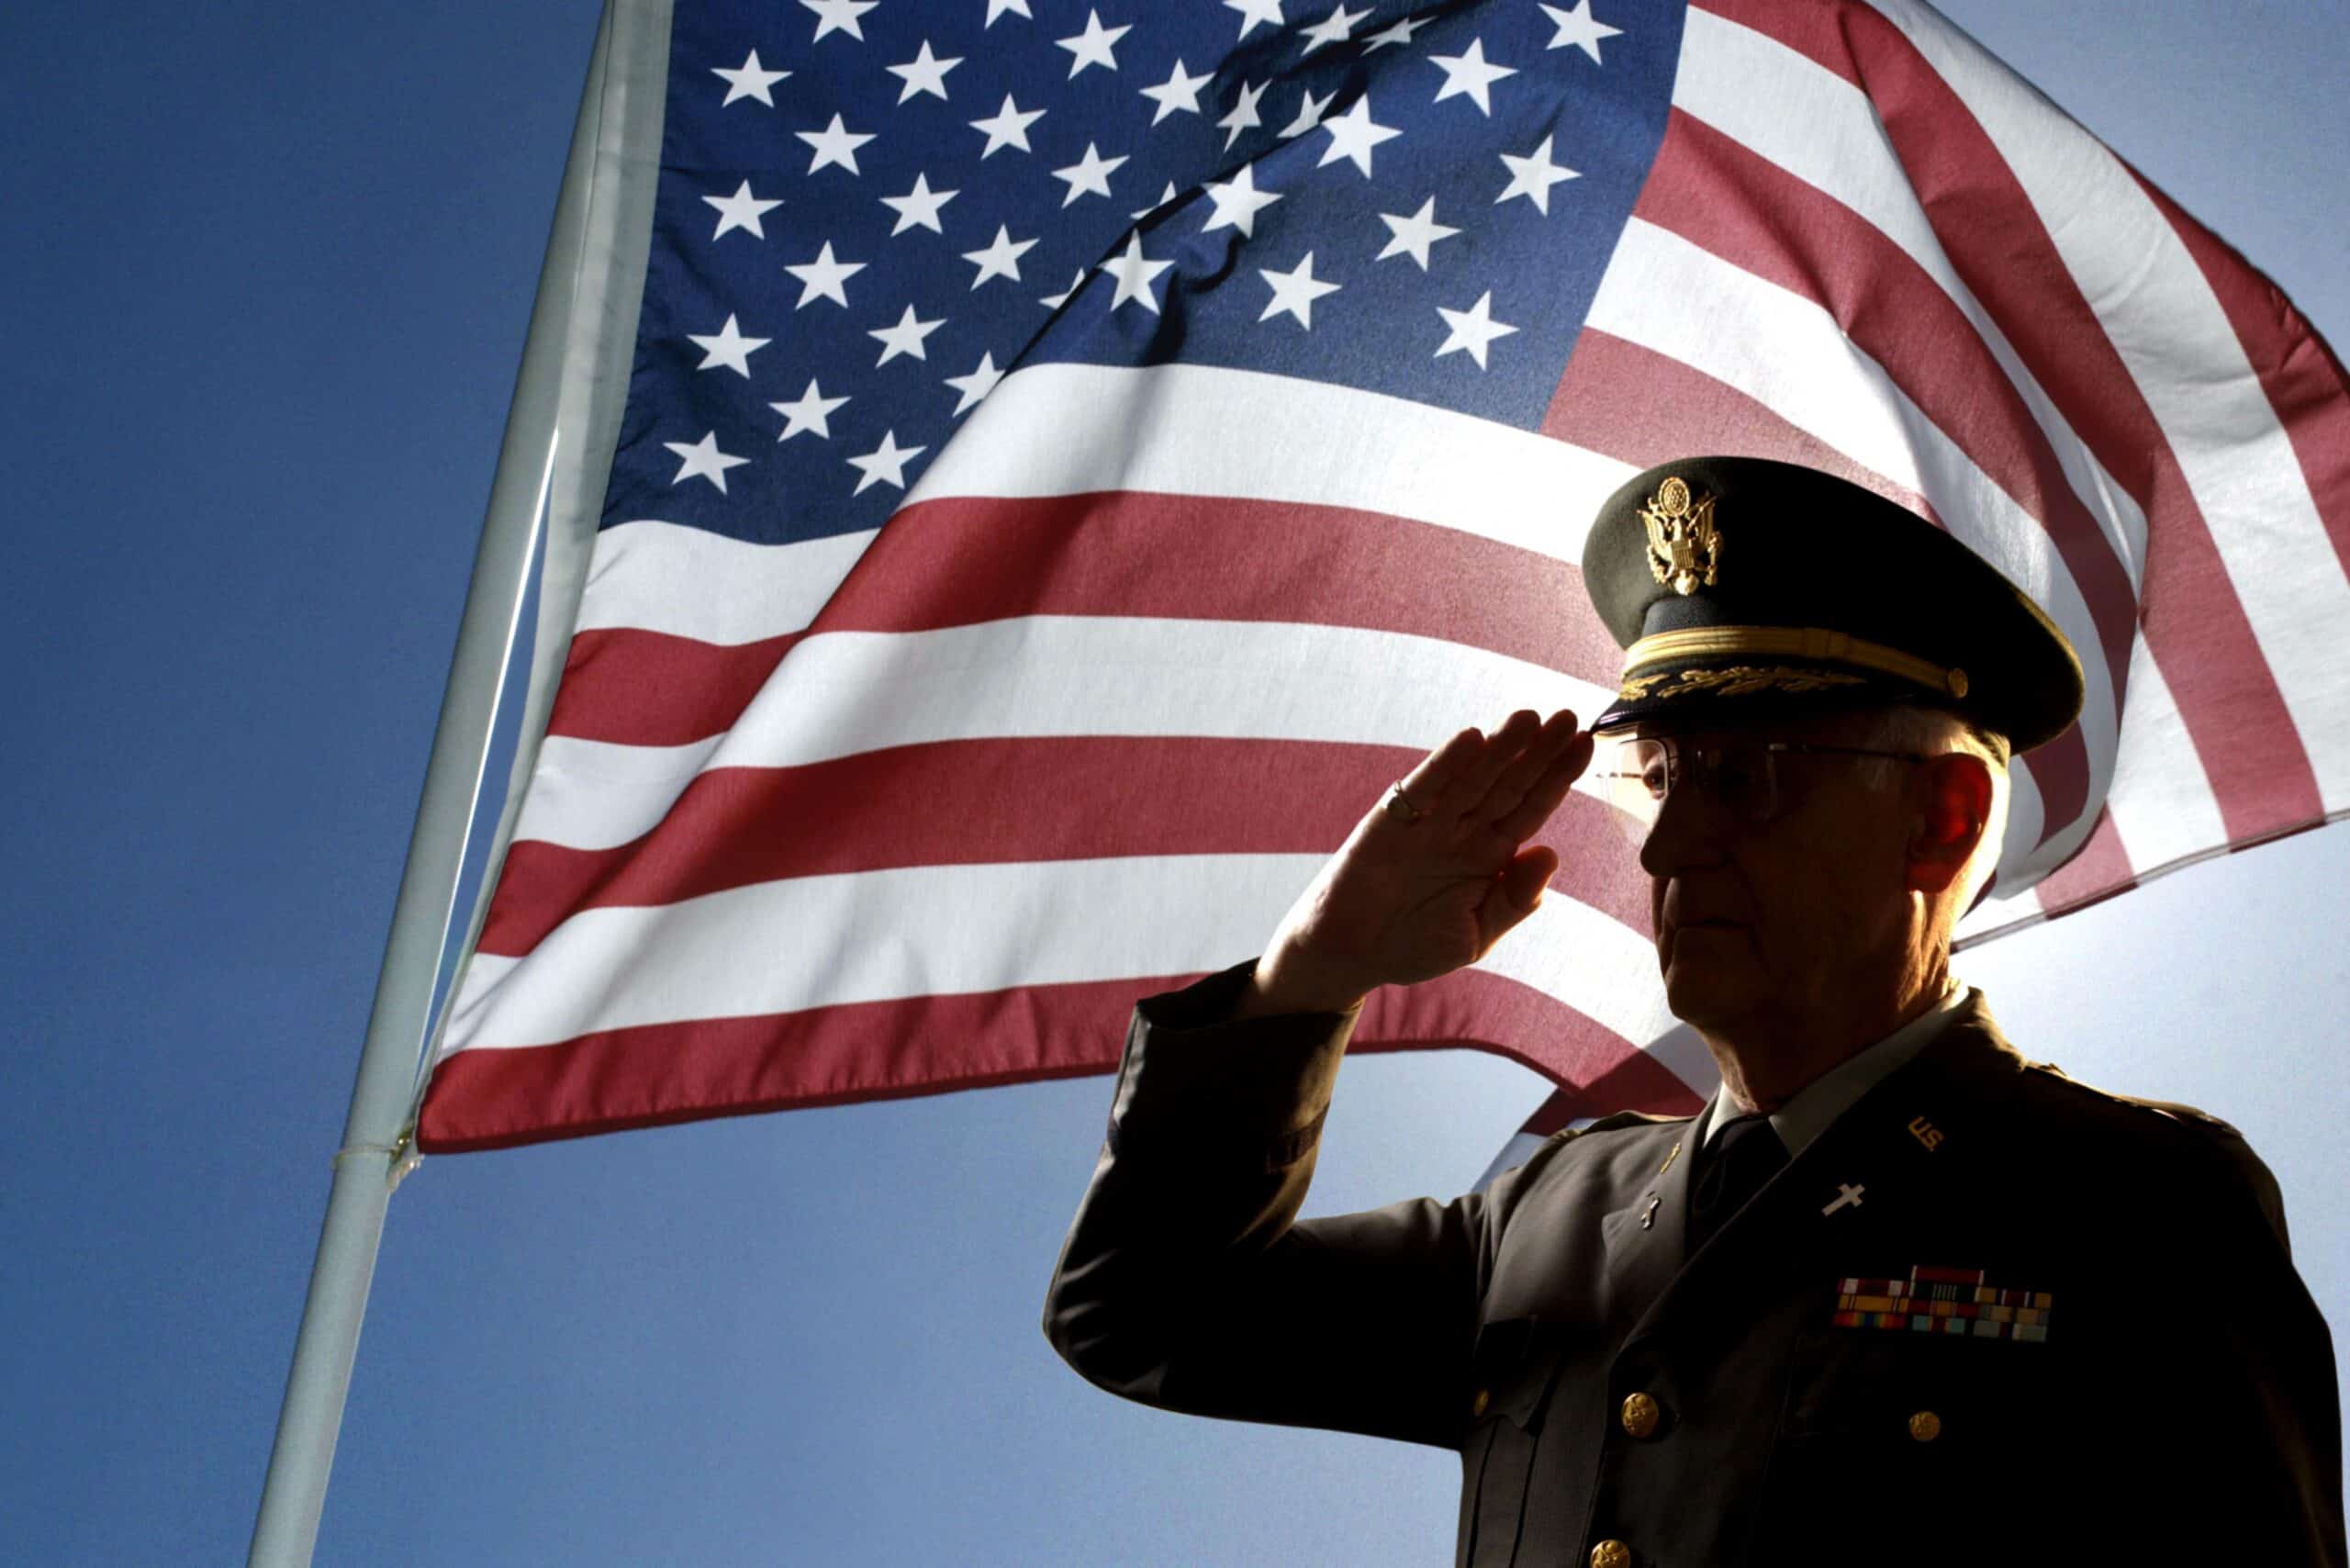 Army: Colonel | Silhouette of veteran US Army Colonel Chaplain wearing hat and saluting with an American flag flying behind him.